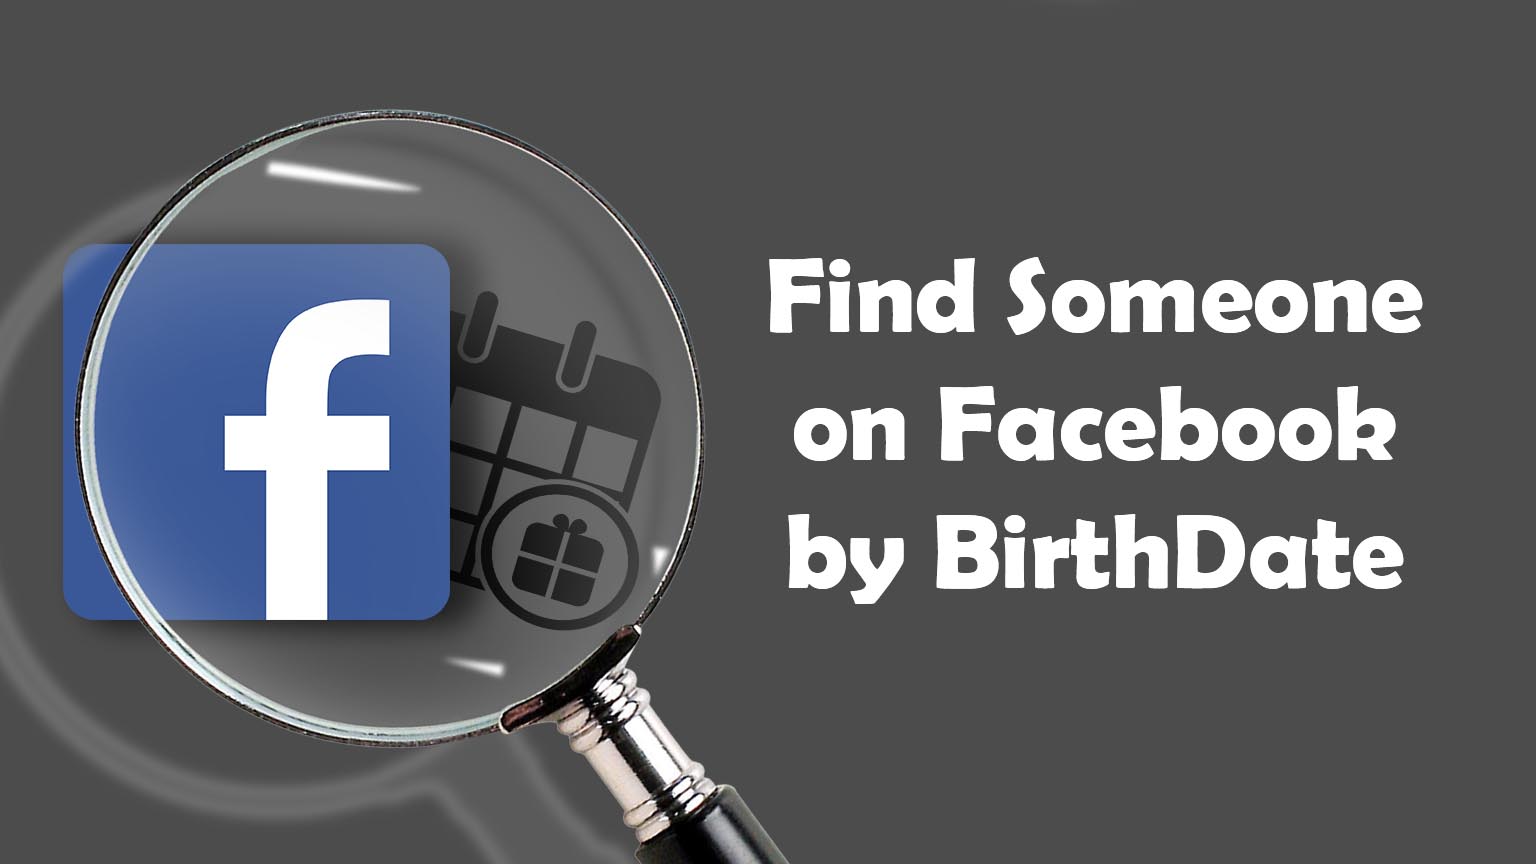 Can I search for someone via their date of birth on Facebook?